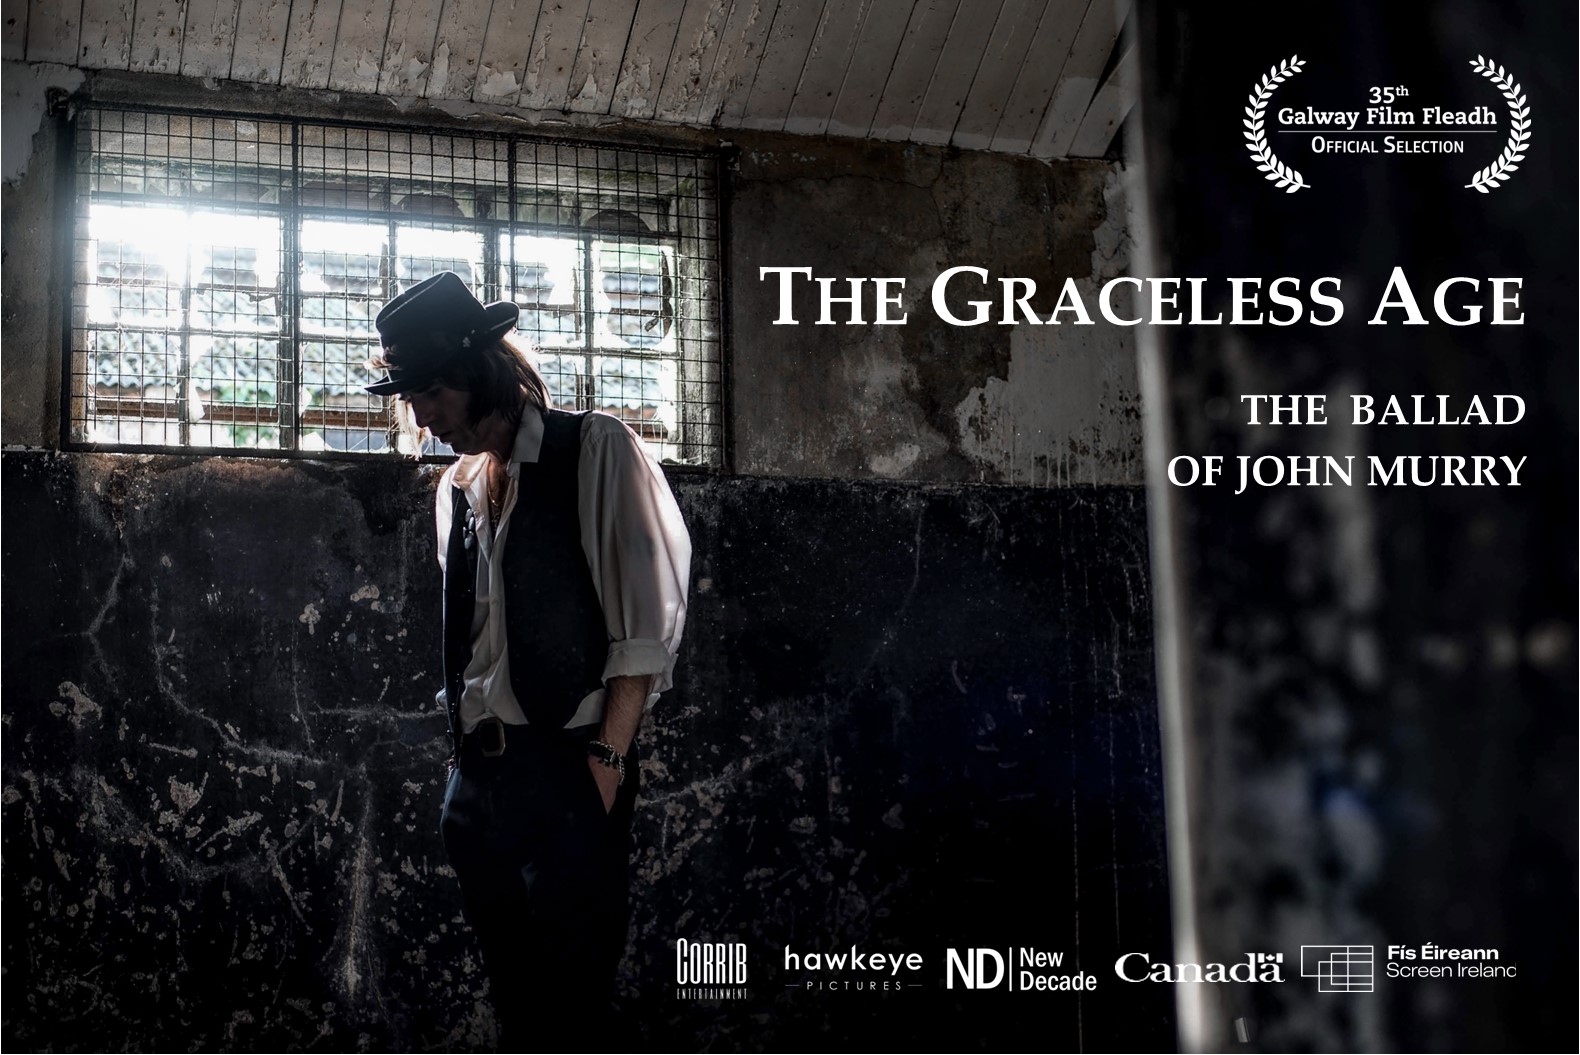 Galway Film Fleadh world premiere for “The Graceless Age – The Ballad of John Murry”